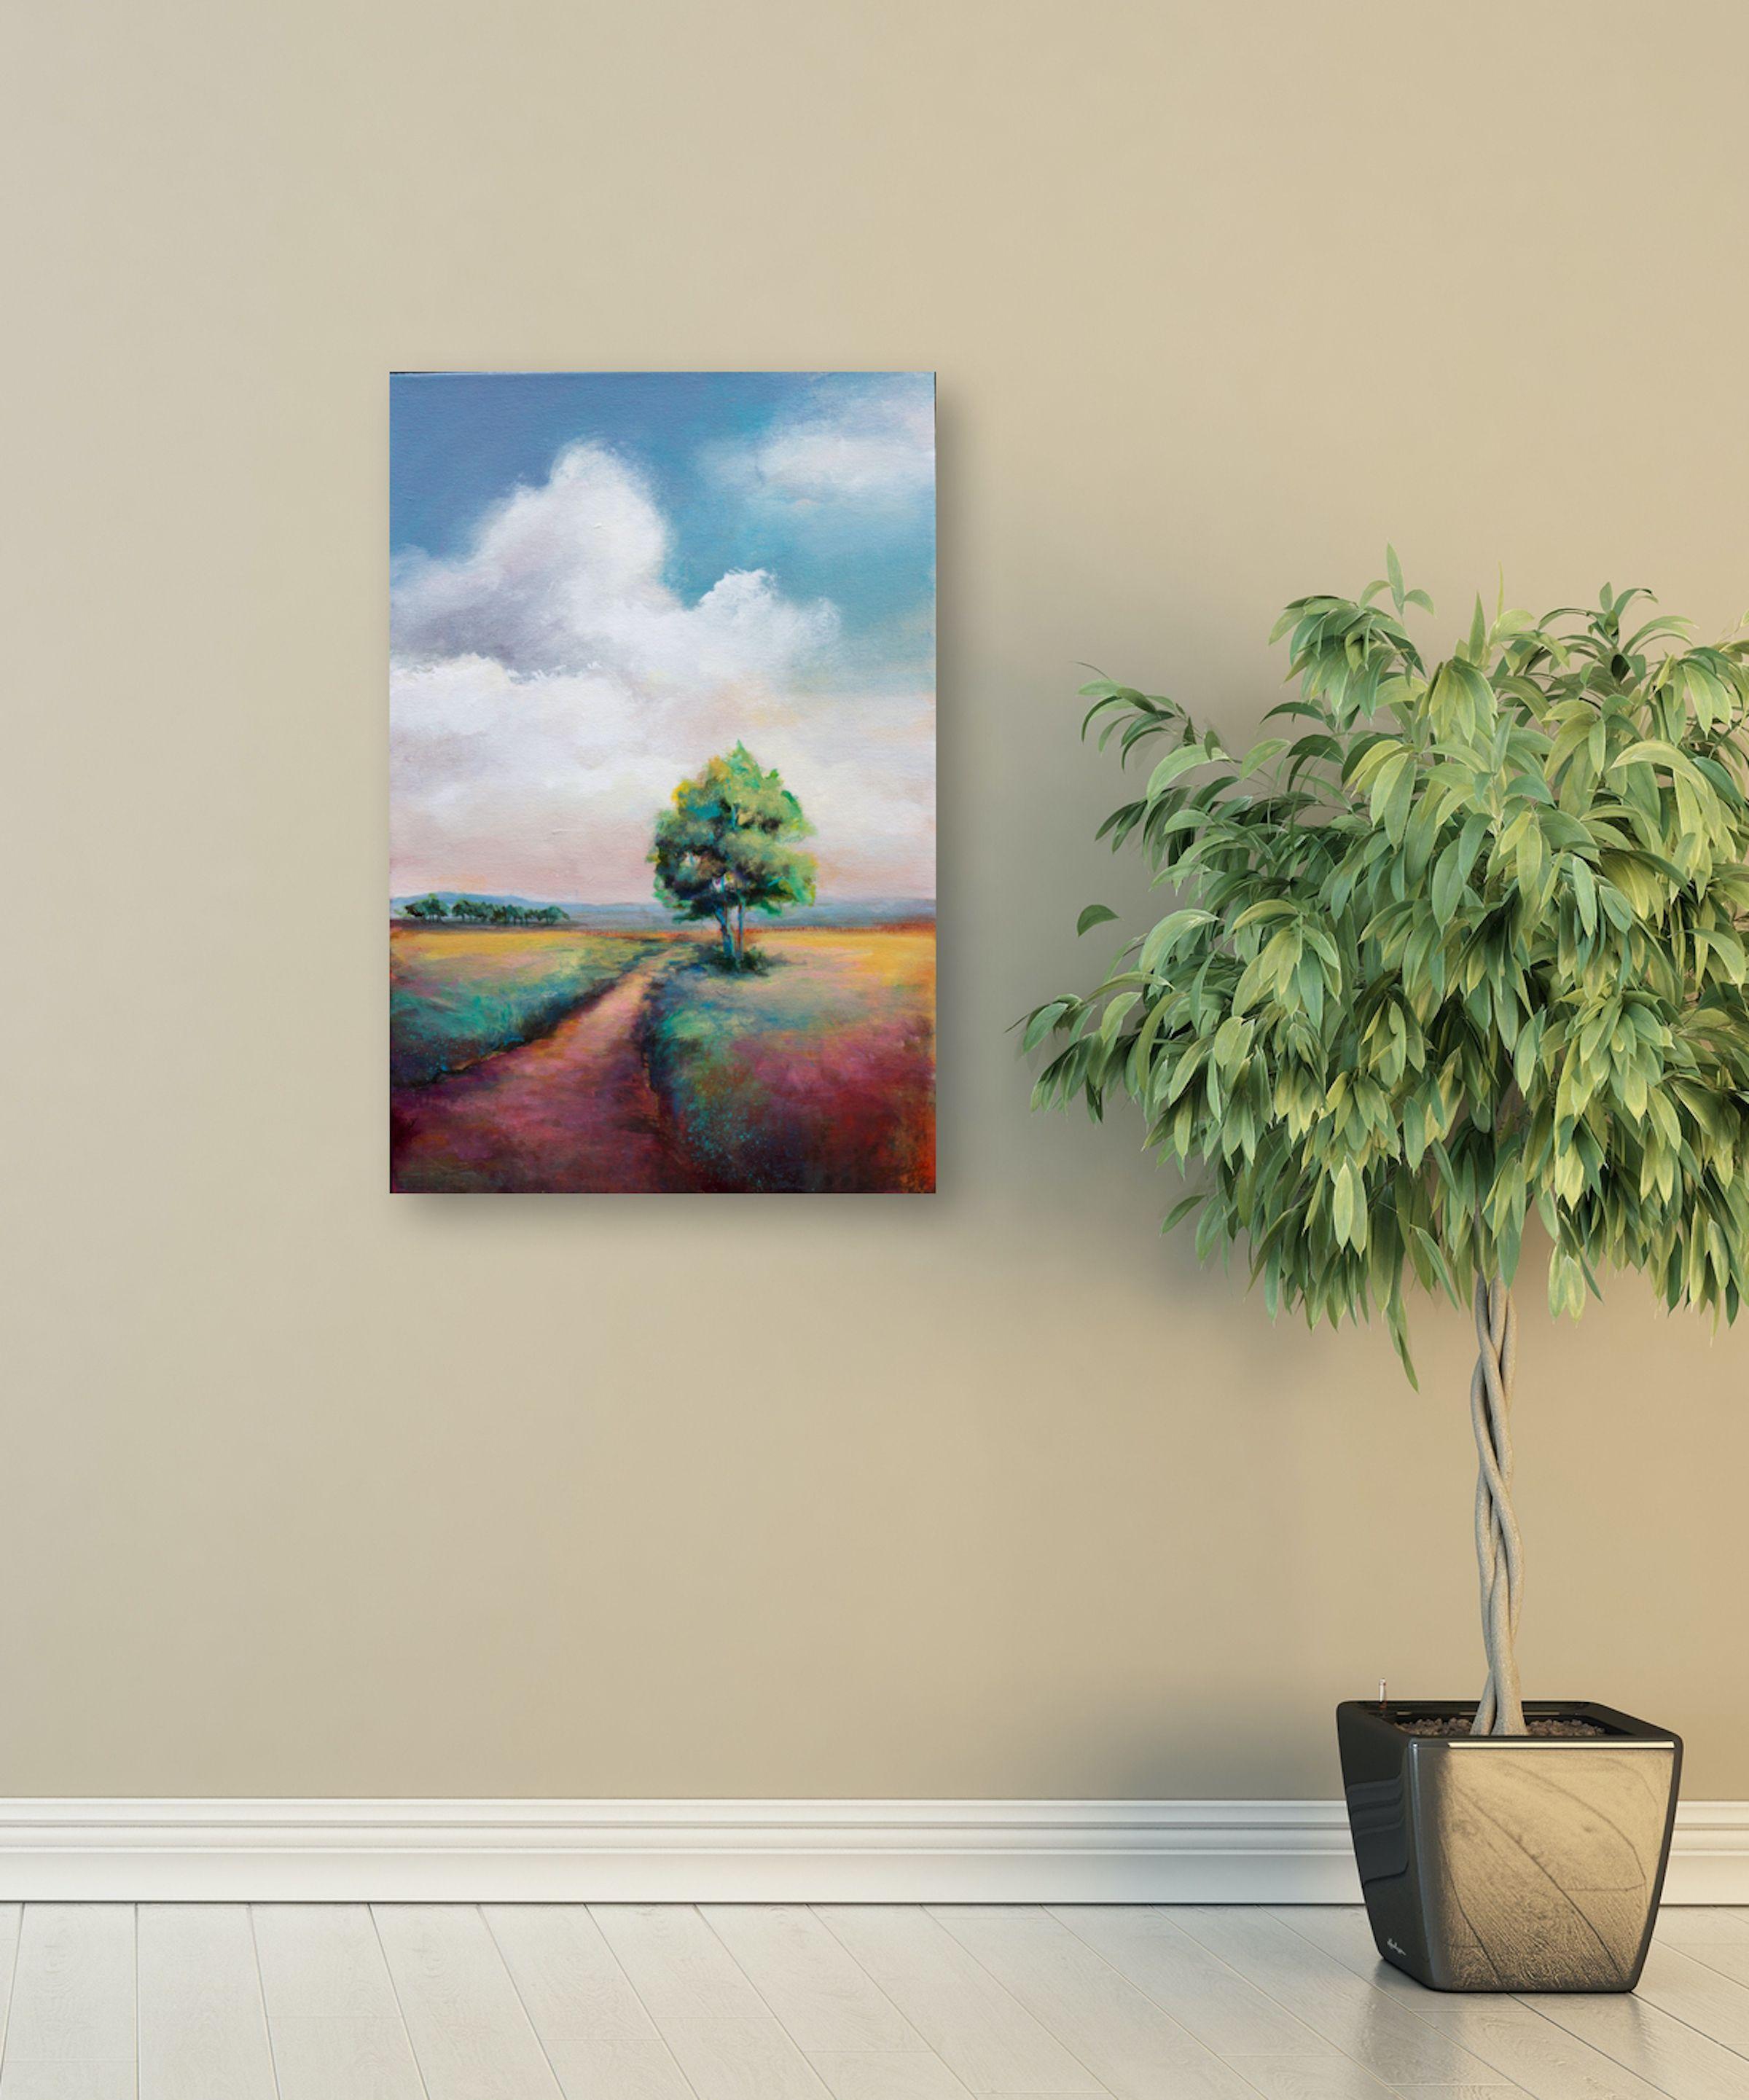 This original colorful landscape is done in an impressionist style and presented on a gallery wrapped canvas.  There are 10+ layer of acrylic paint and washes that give the piece nuance, depth, and interest.  The sided edge are painted black and it